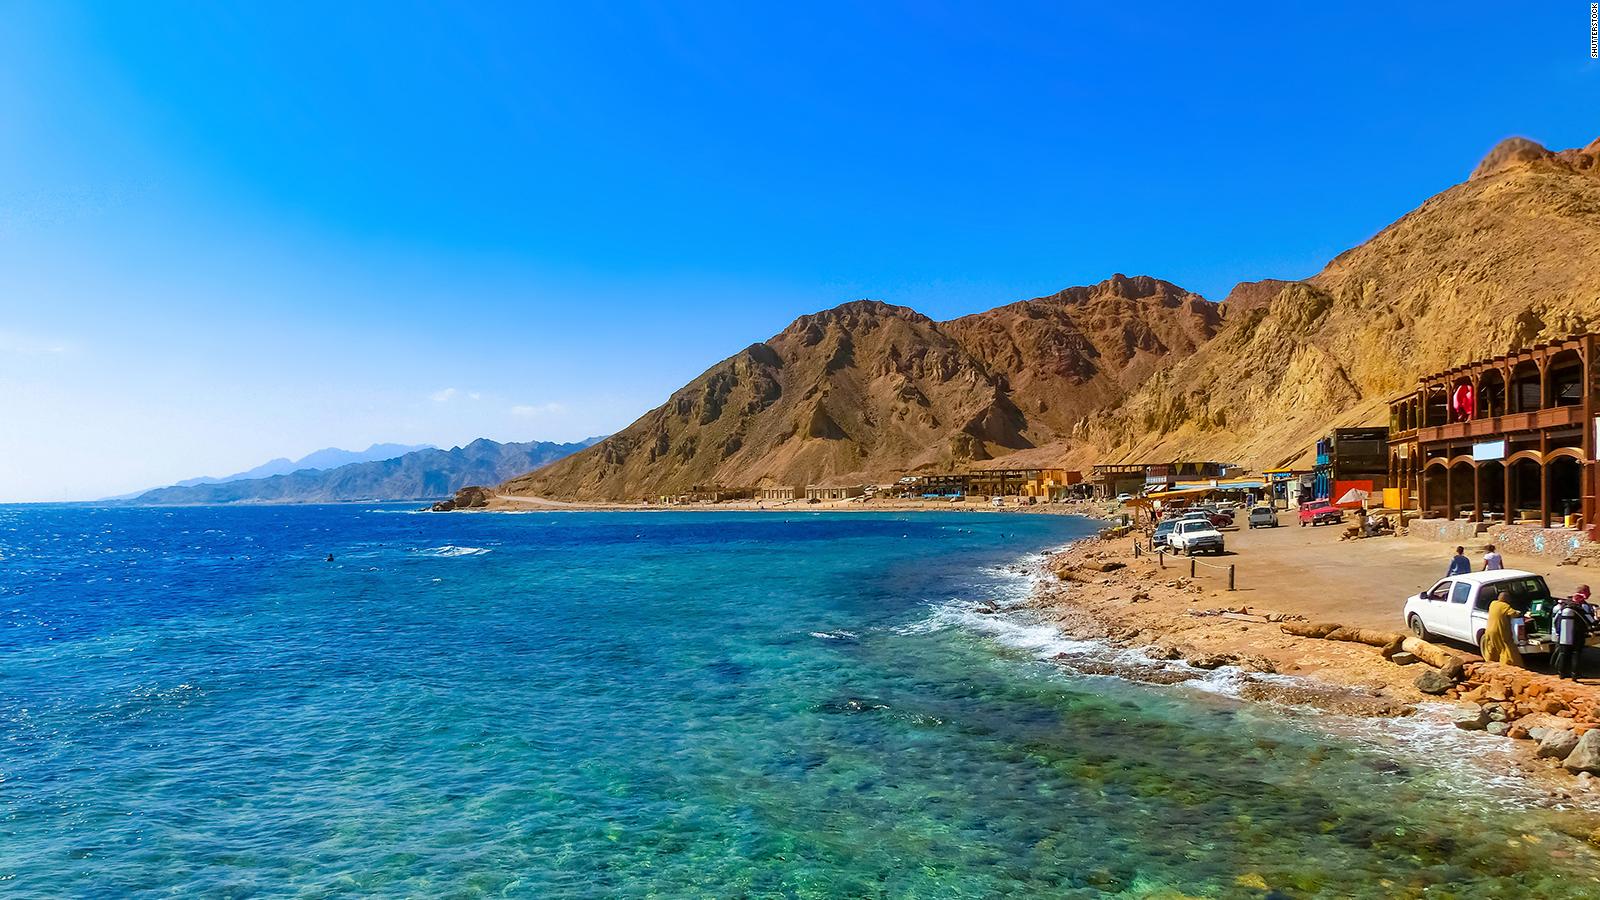 Why Egypt's Dahab is the perfect Red Sea resort town | CNN Travel